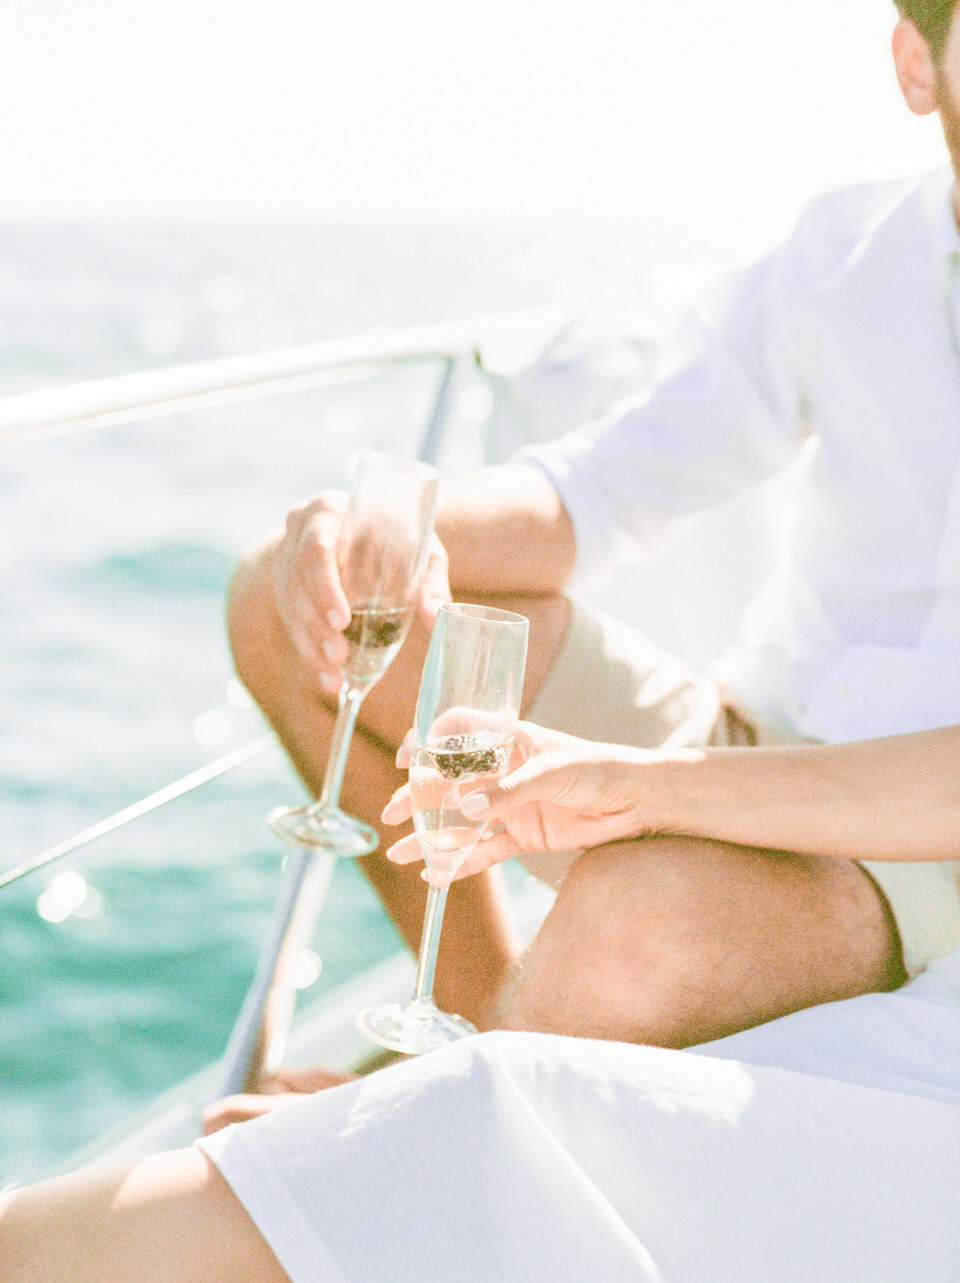 Luxury-Yacht-Engagement-Session-in-Algarve-Portugal-003